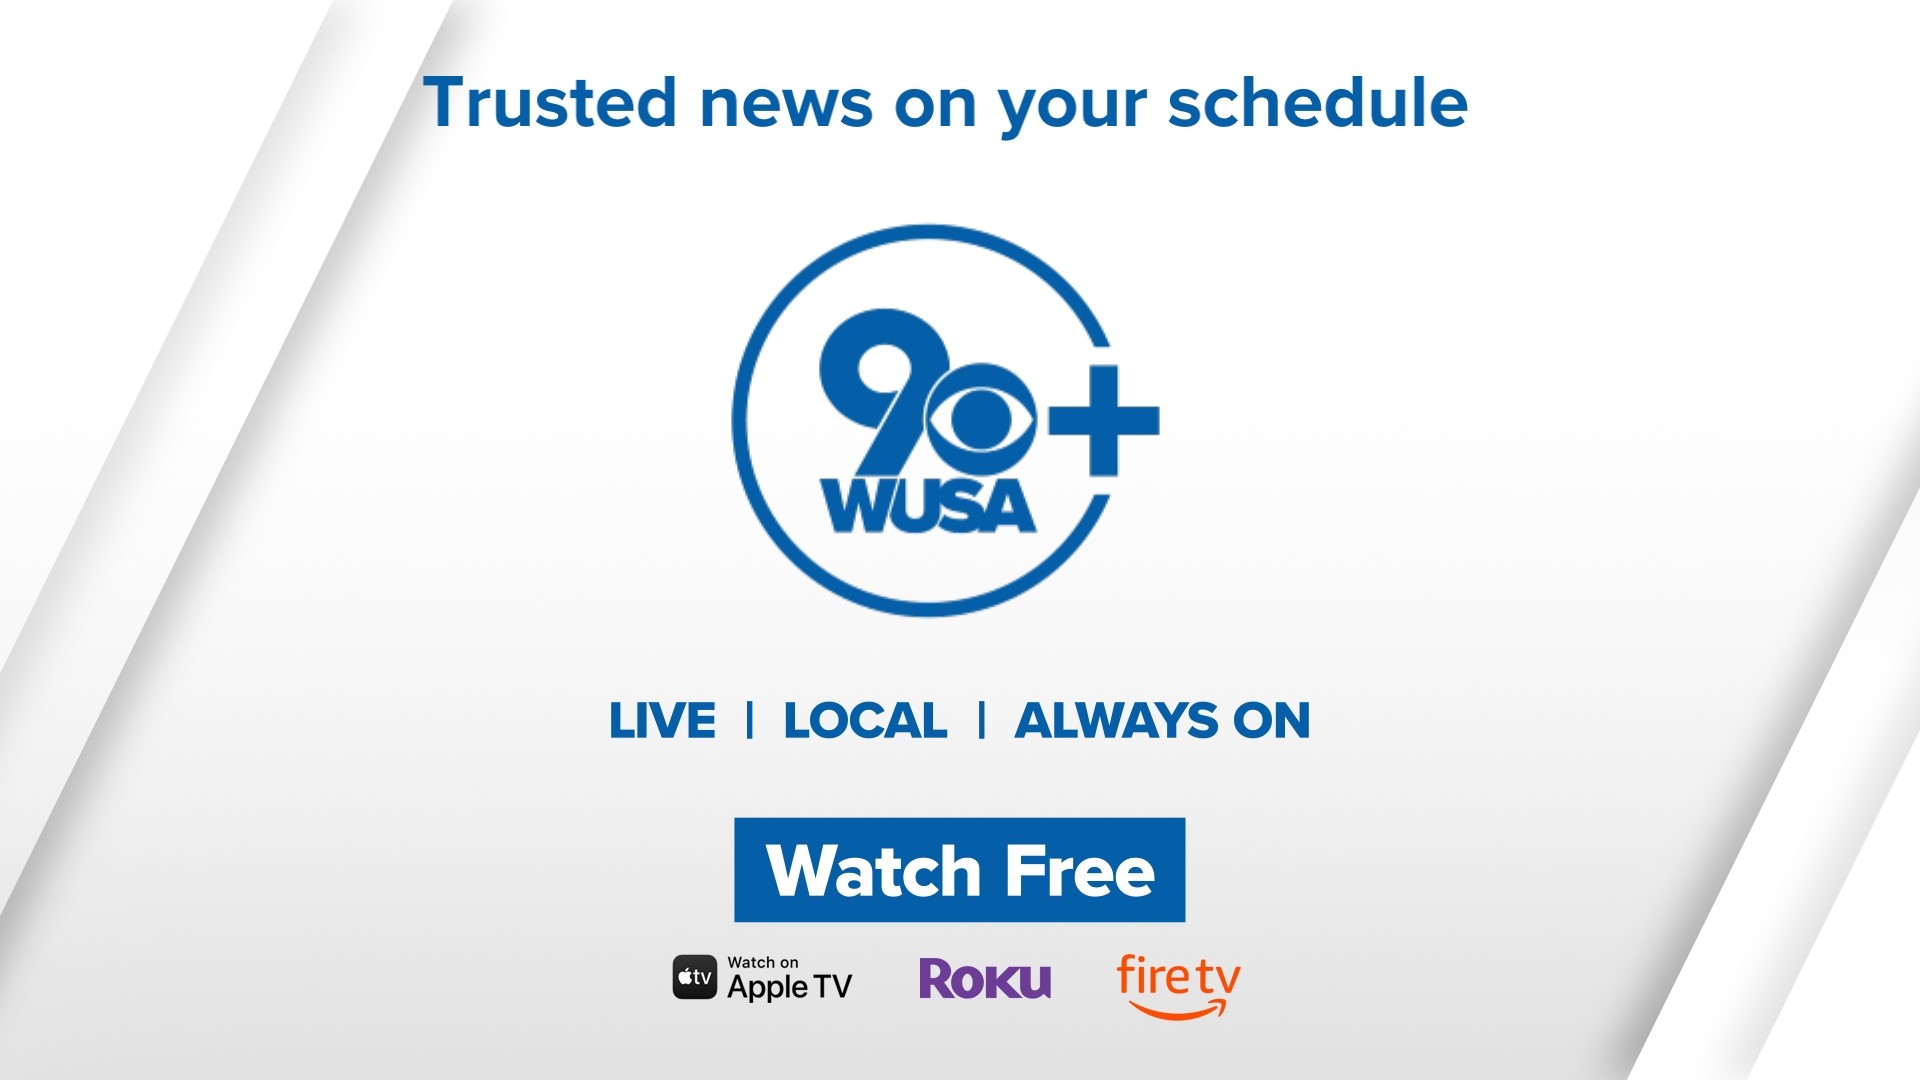 Stream WUSA9+ for free on Roku, Amazon Fire TV, Apple TV, Samsung, Android TV, and other devices